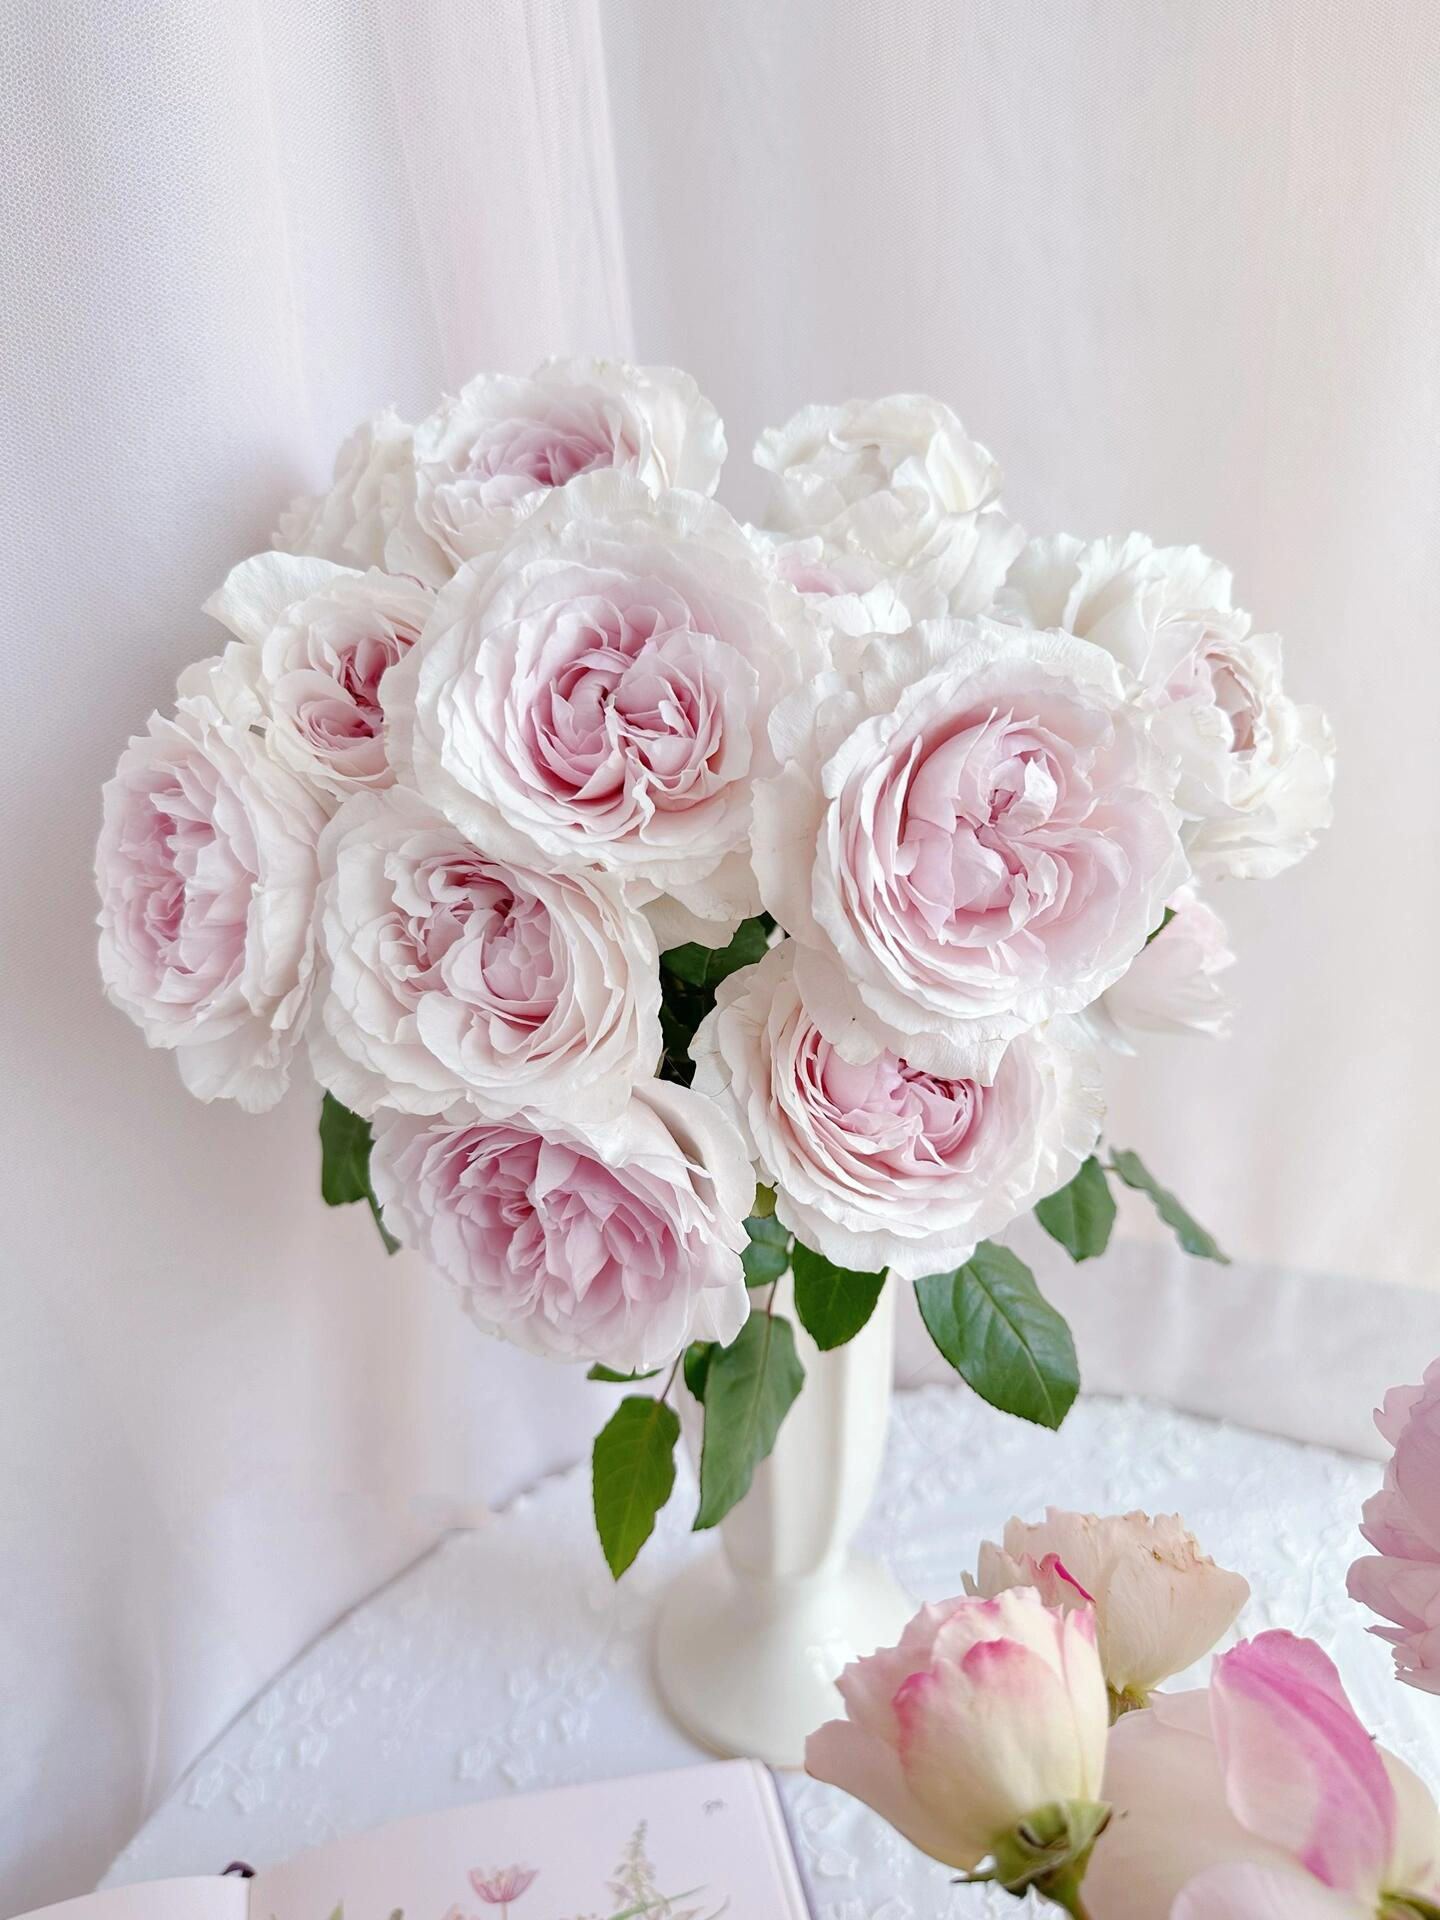 Rose【Les fraises】- 2 Gal+ Own Root Bare Root| Japanese Rare Rose｜草莓奶昔｜Large Bloom| Fragrance| Long flowering period| Ruffle Lace |Perfect